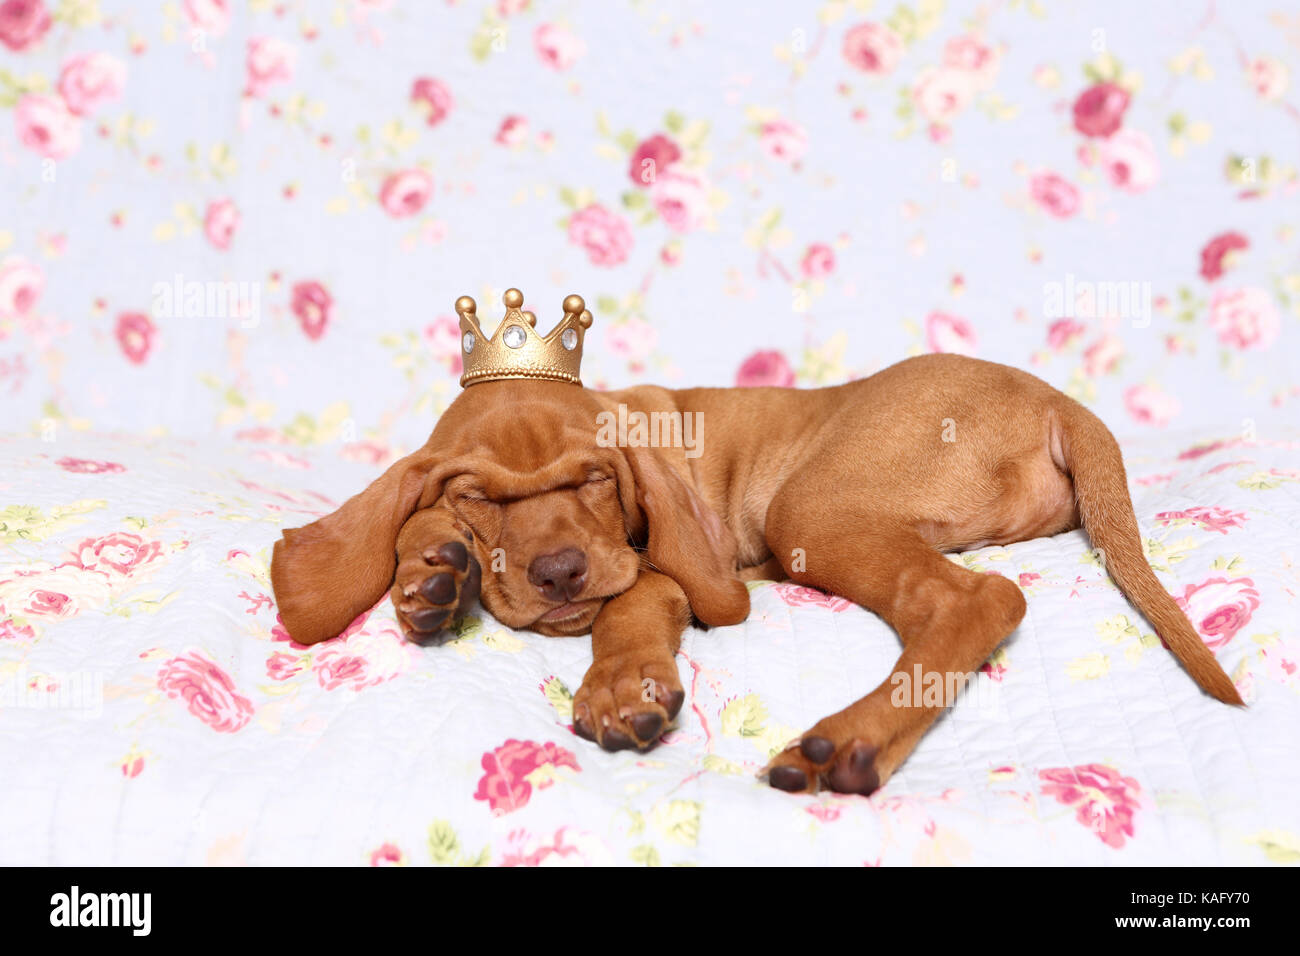 Vizsla. Puppy (6 weeks old) sleepig on a blue blanket with rose flower print, wearing a crown on its head. Germany Stock Photo